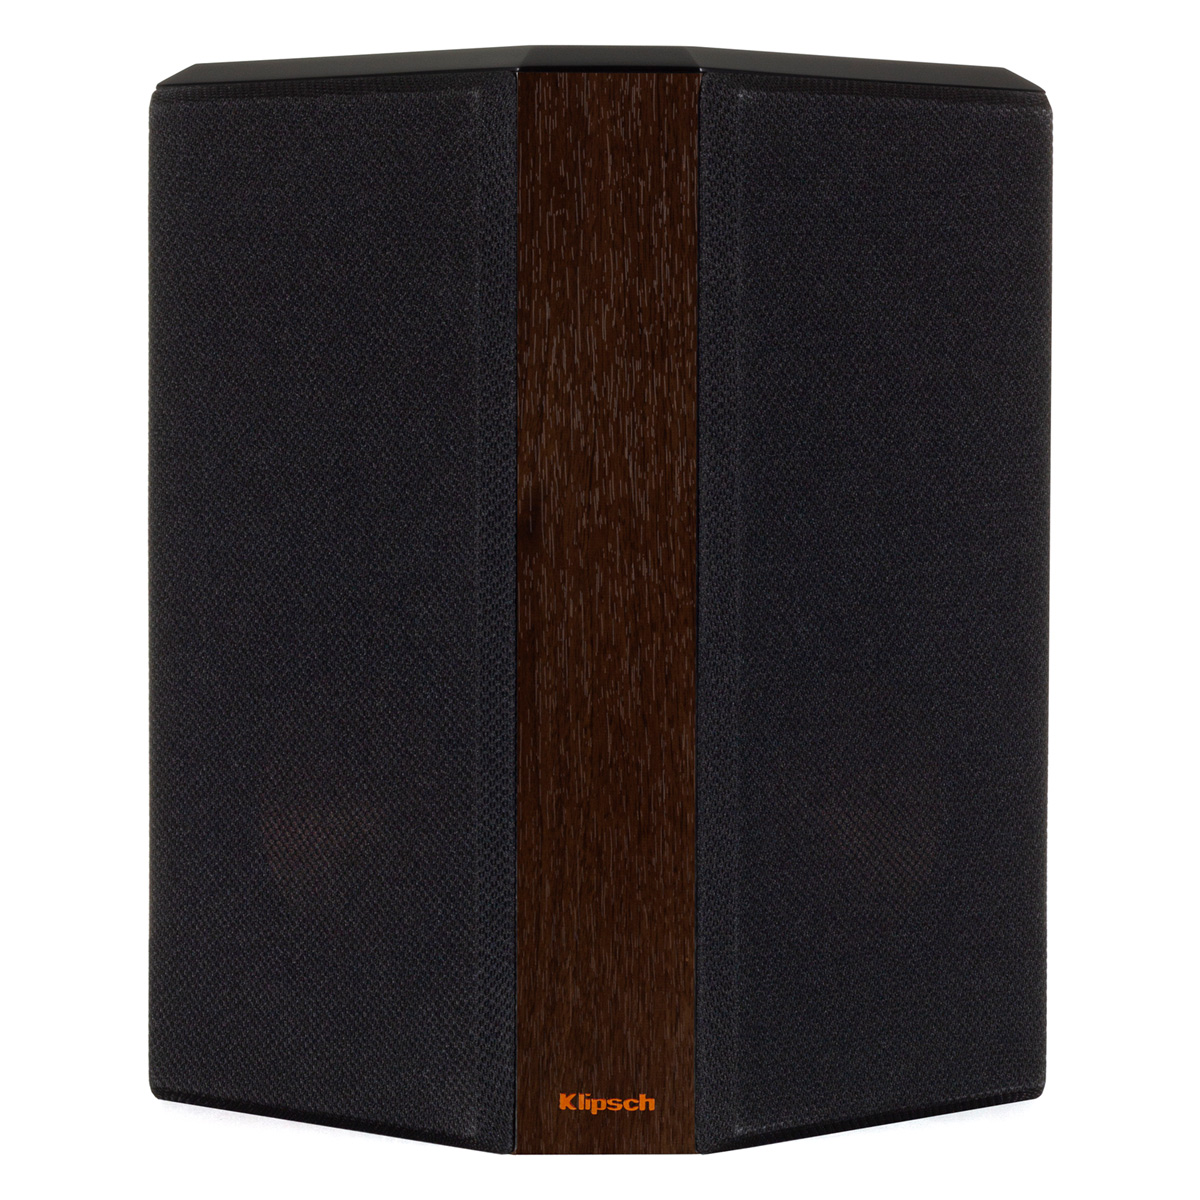 Klipsch RP-502S Reference Premiere Surround Speakers - Pair (Walnut) - image 3 of 3